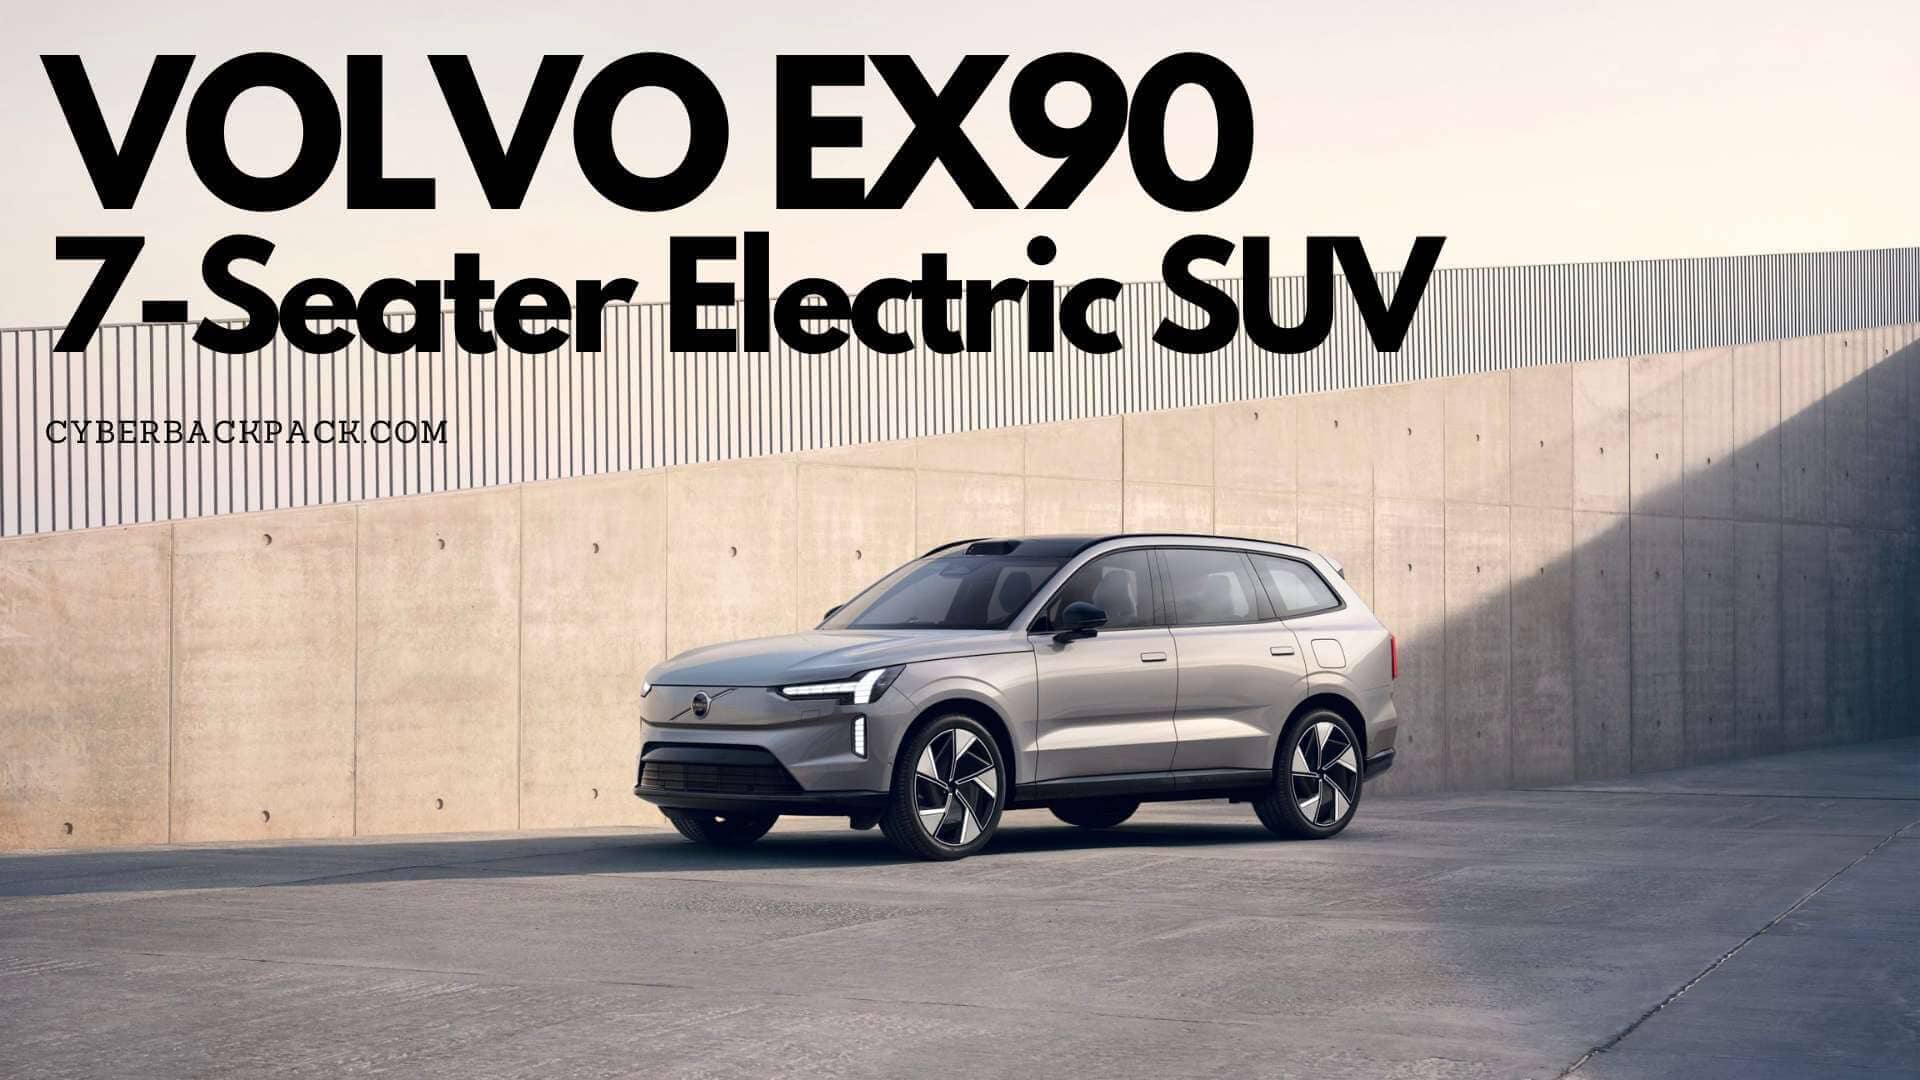 Volvo’s Latest Electric Vehicle: The 7-Seater SUV EX90